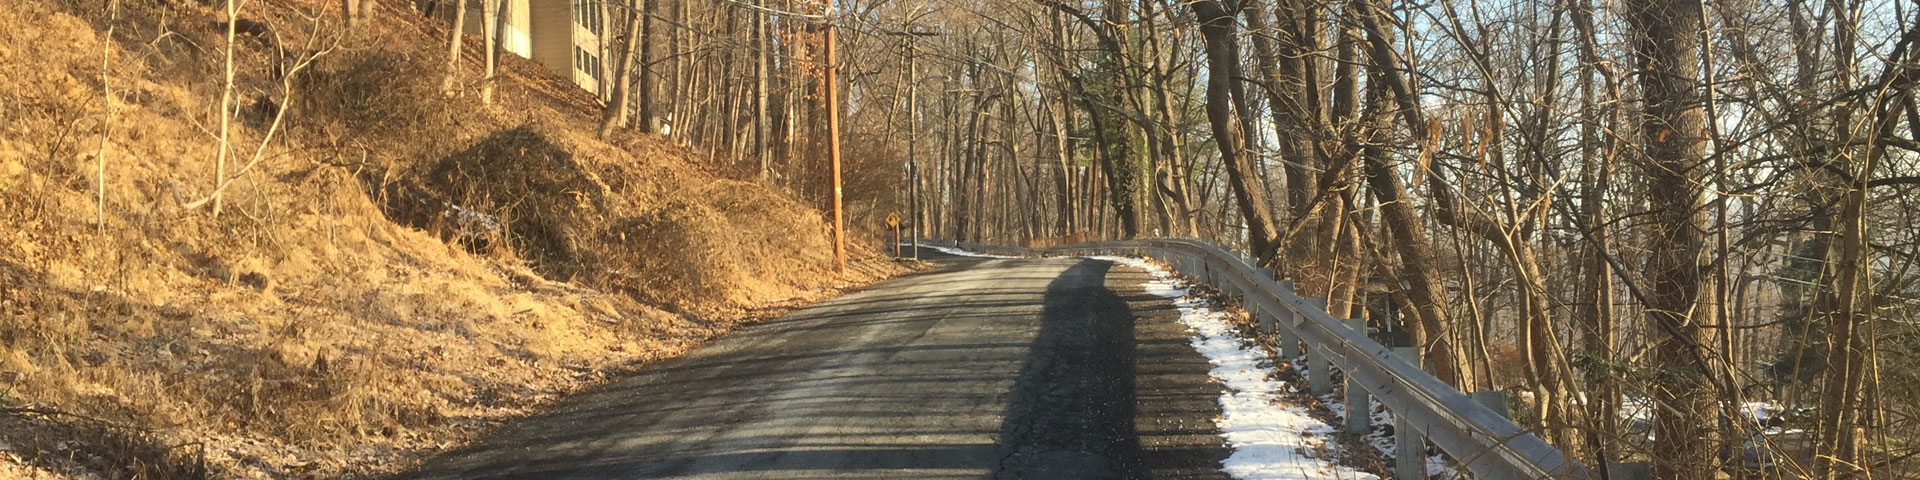 A back country road, with a thin line of snow on the right shoulder.